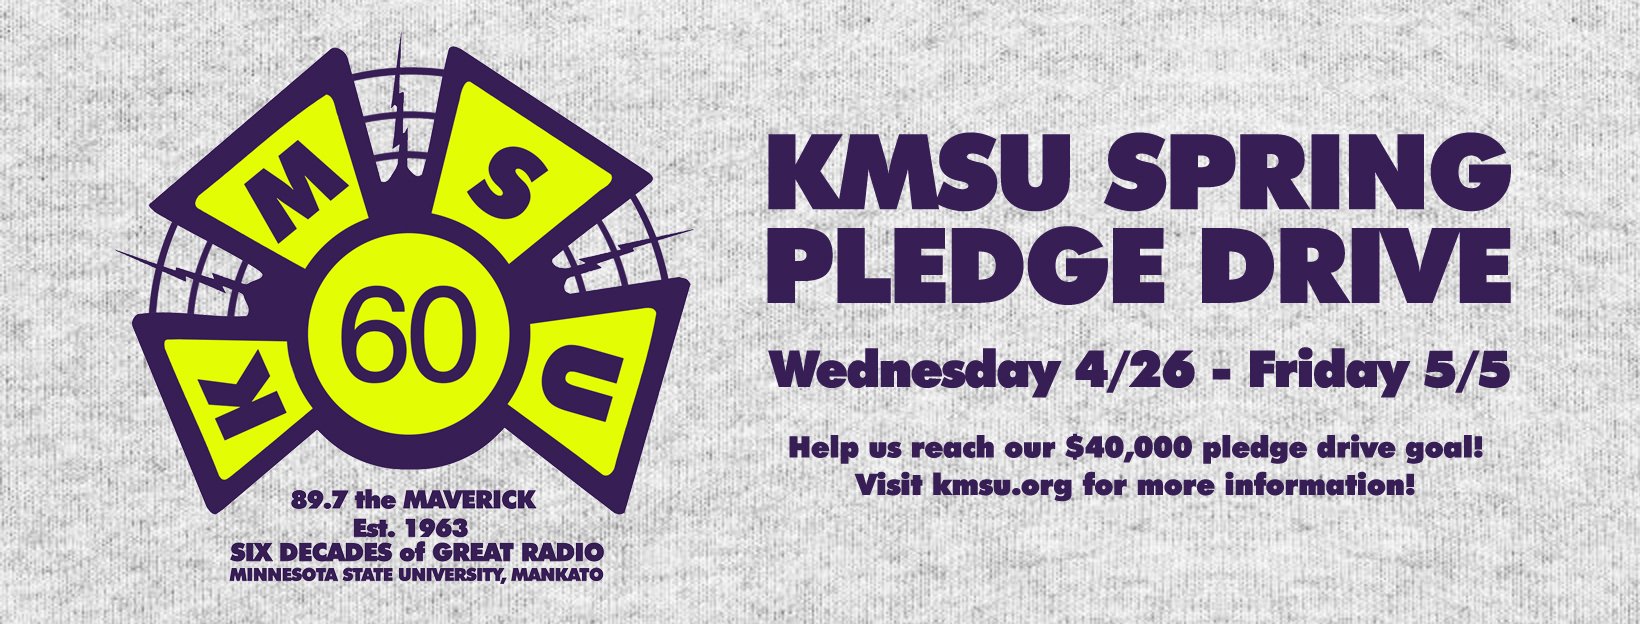  The KMSU Spring Pledge Drive begins on April 26th and ends on May 5th